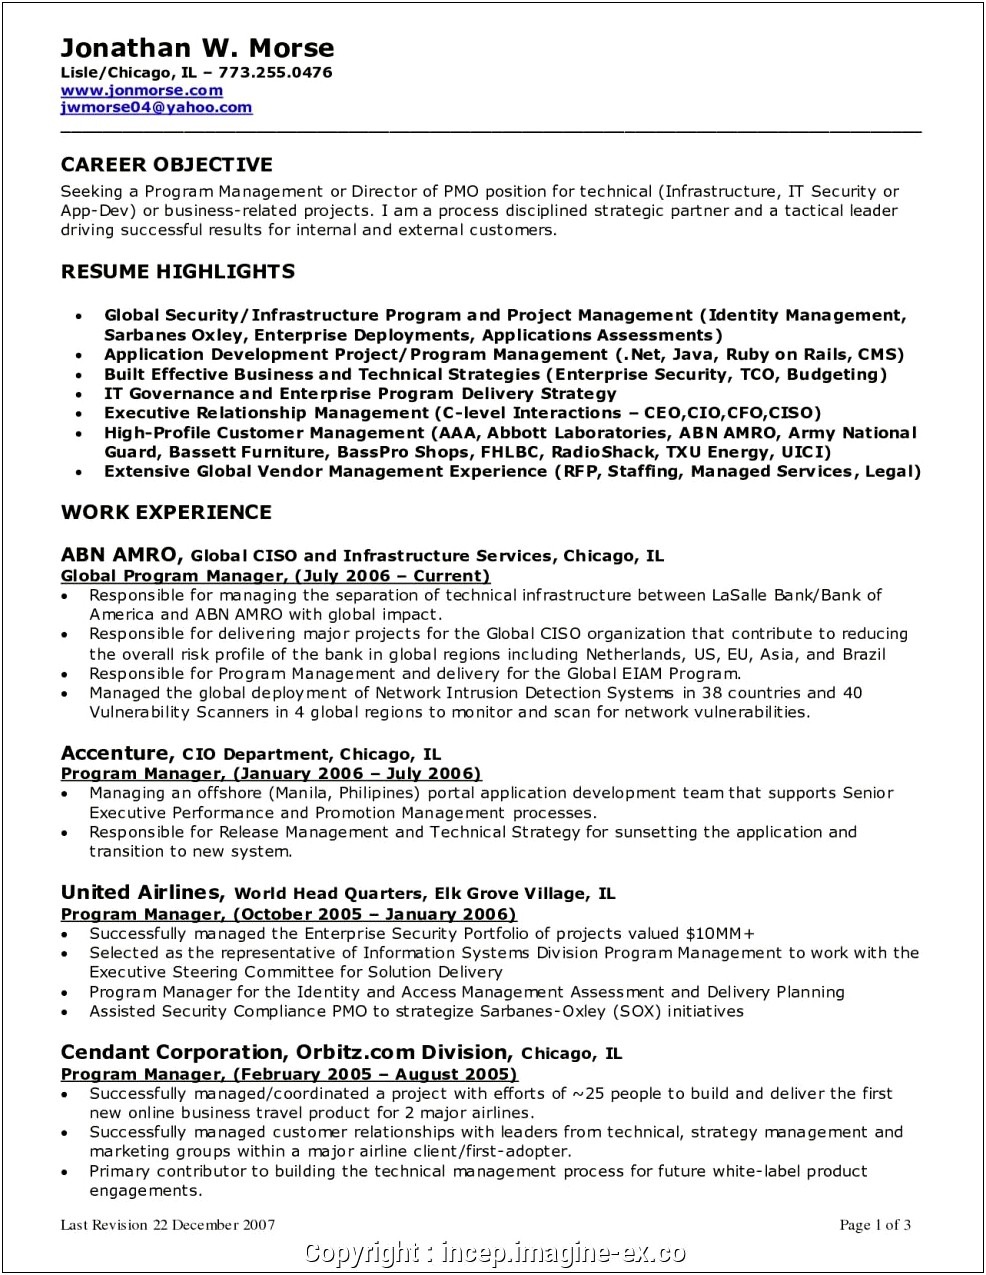 Marketing Project Manager Resume Objective